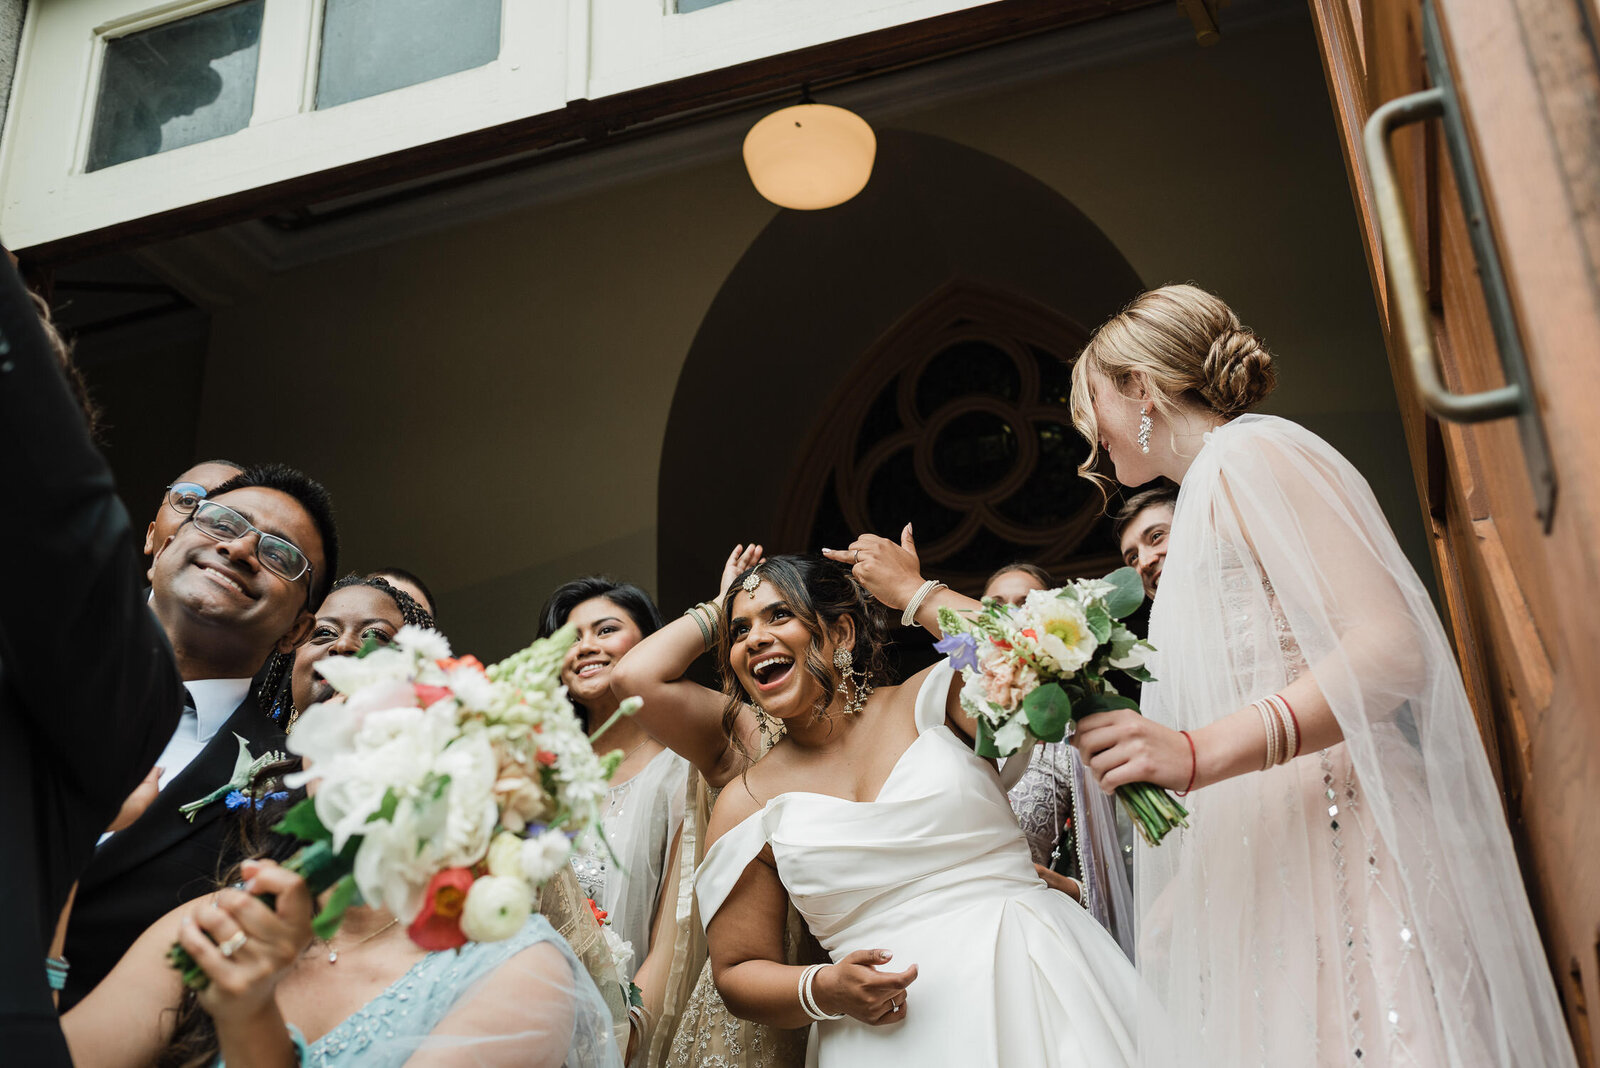 Candid moment of bride and wedding guests celebrating after wedding ceremony.